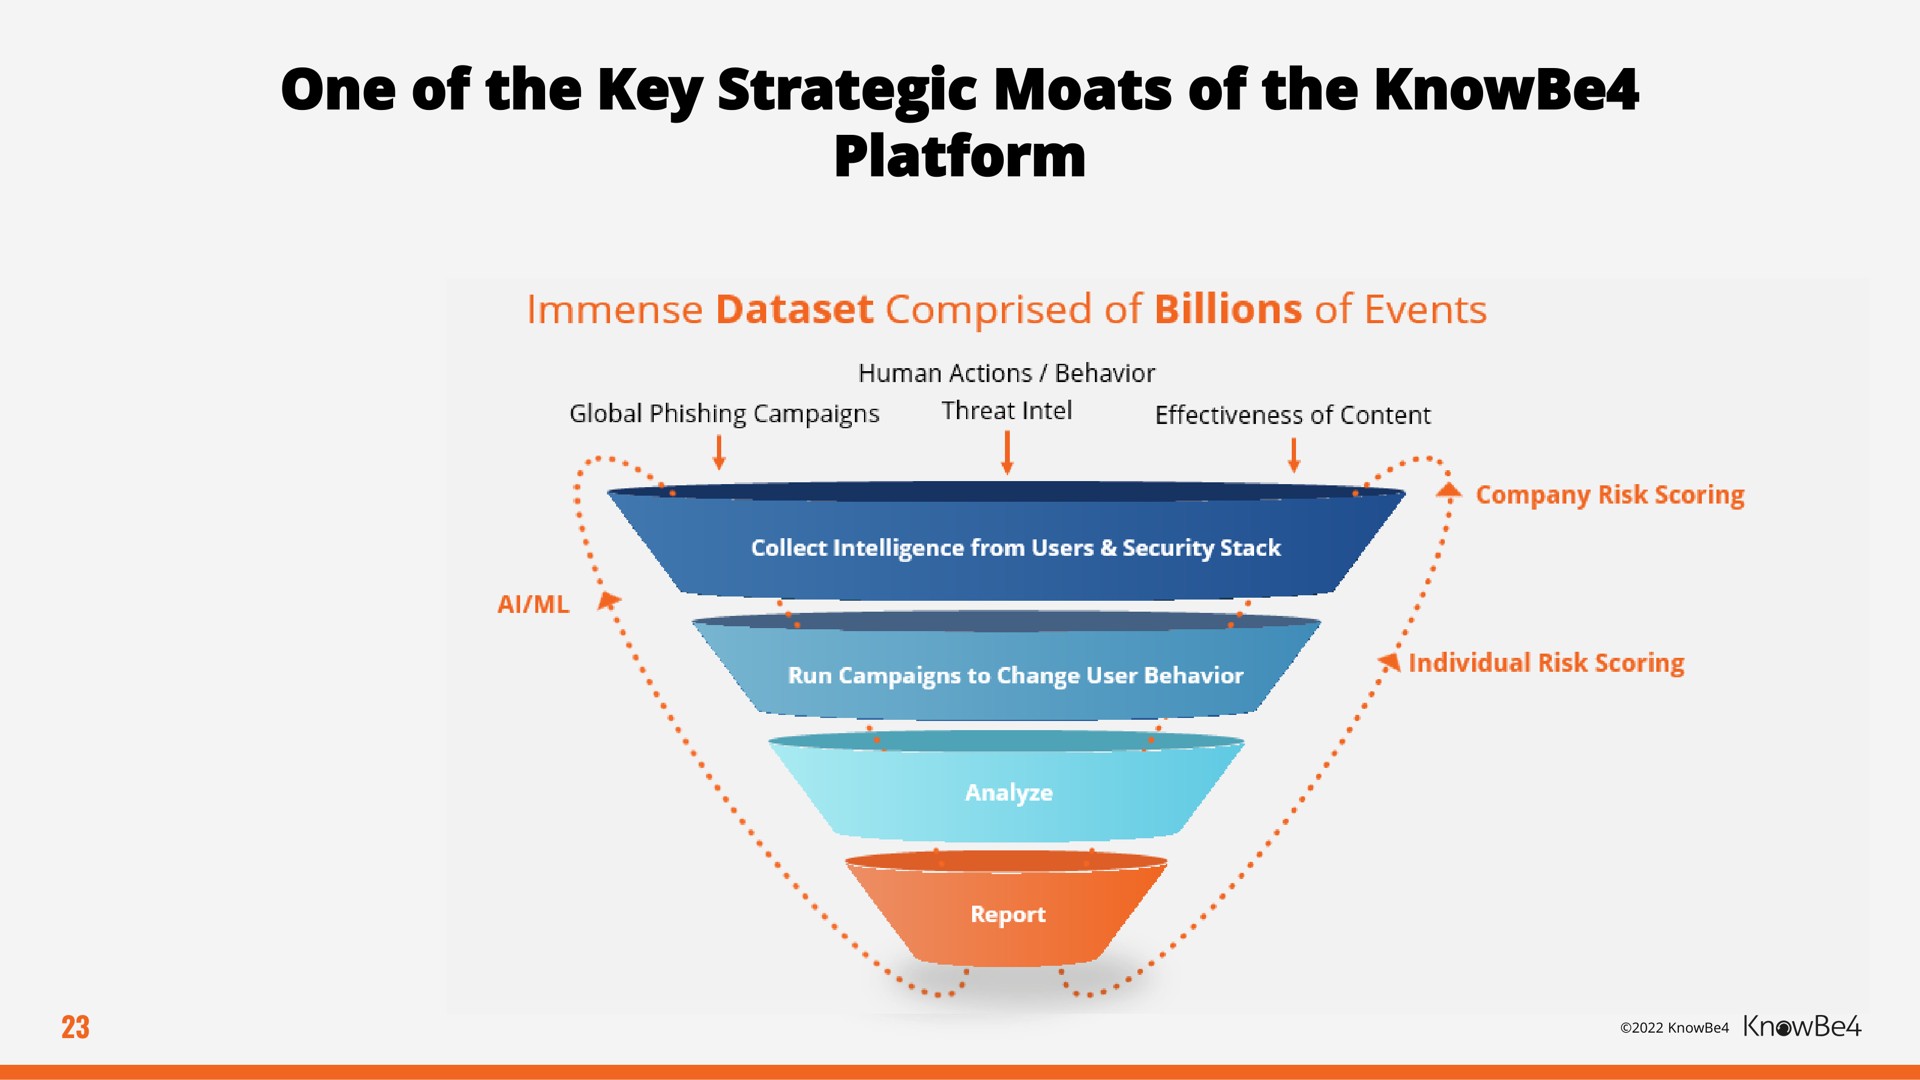 one of the key strategic moats of the platform | KnowBe4